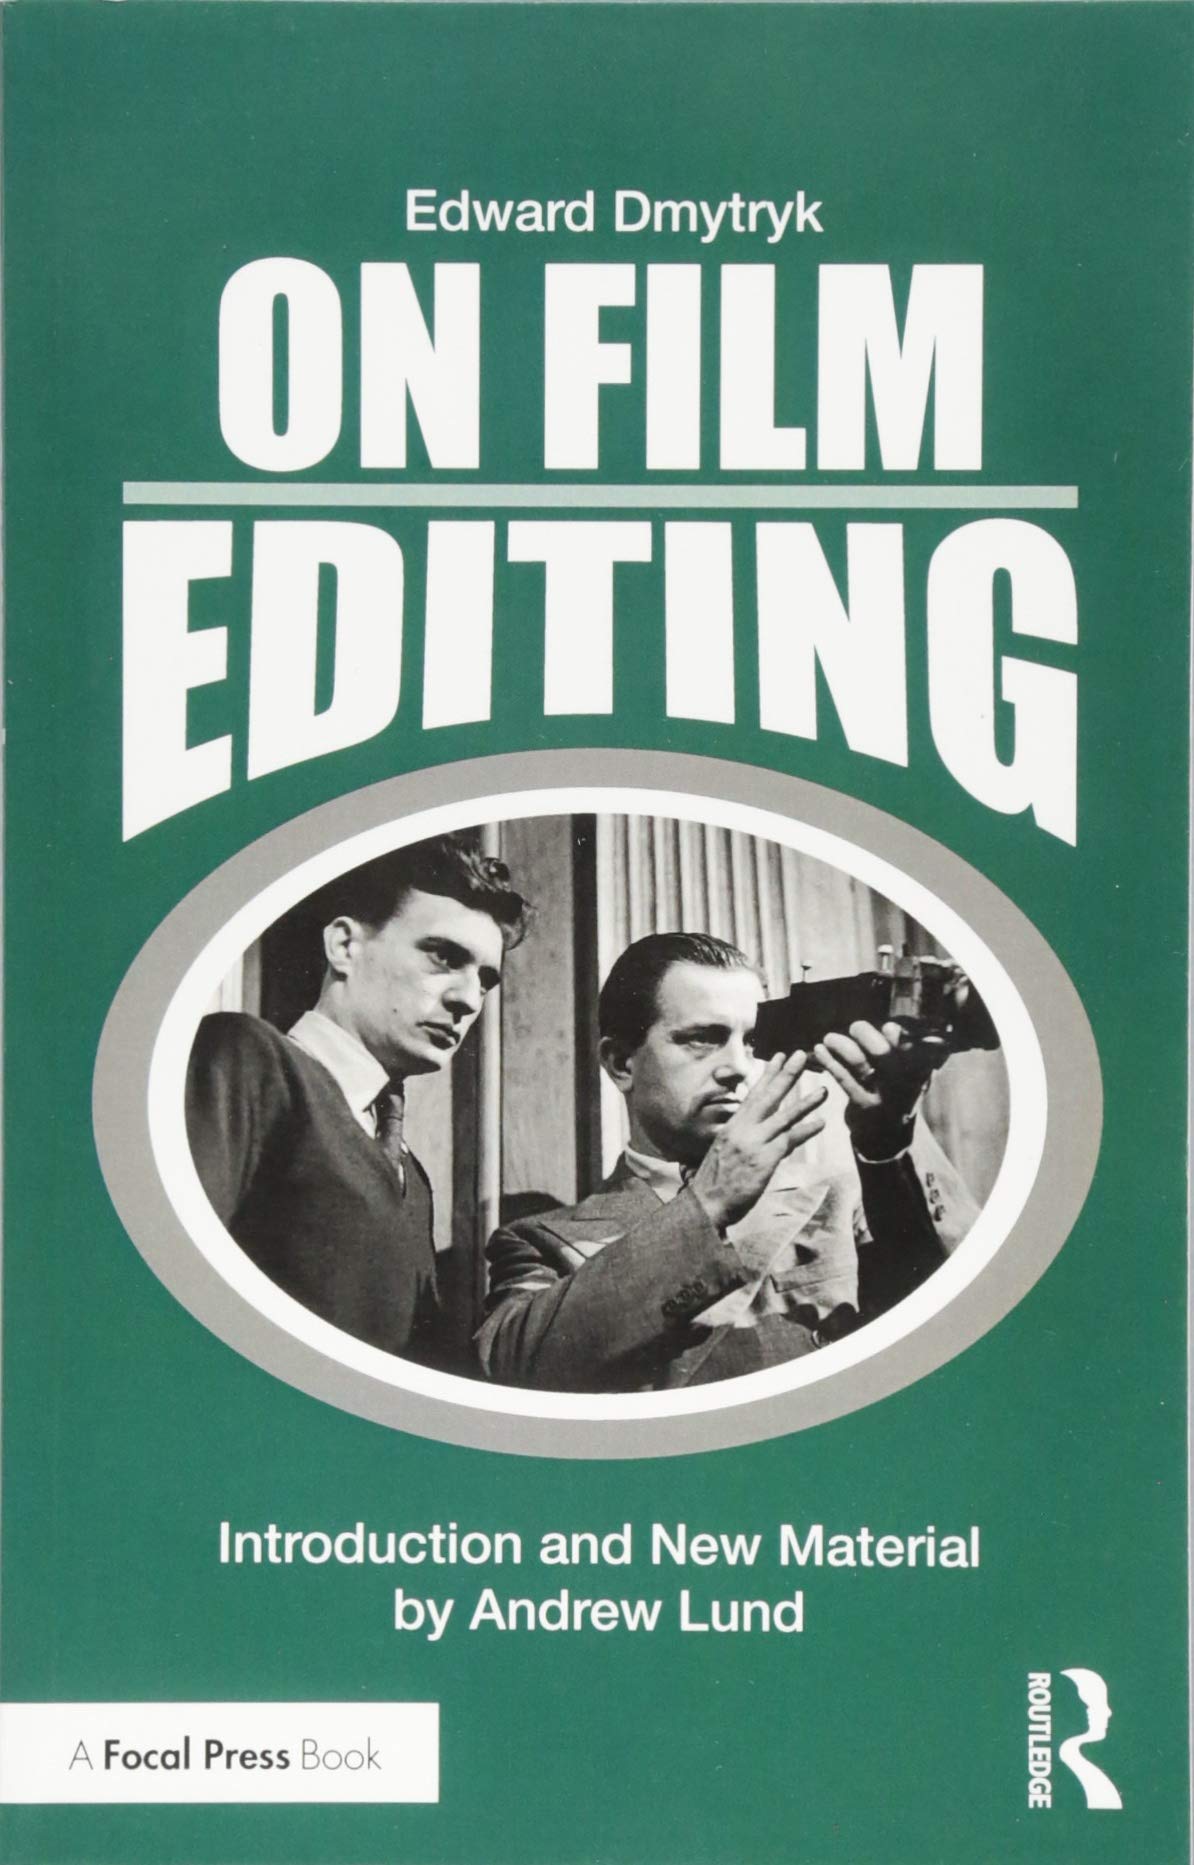 On Film Editing book cover - ON FILM EDITING According to Edward Dmytryk - thescriptblog.com